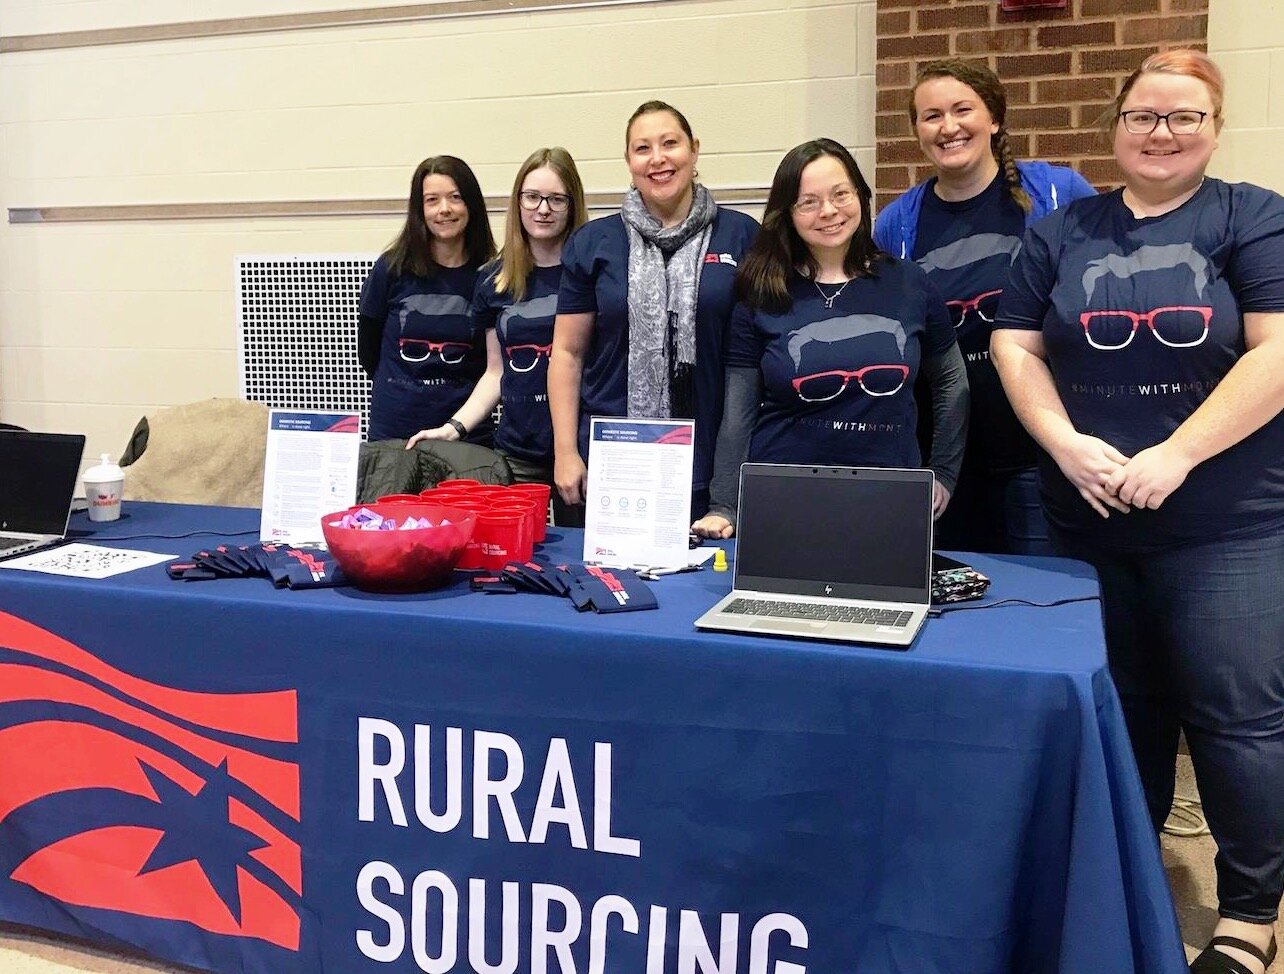 Colleagues at Rural Sourcing Inc.'s Fort Wayne Development Center support local tech talent initiatives like the Girl Scouts STEM Conference.